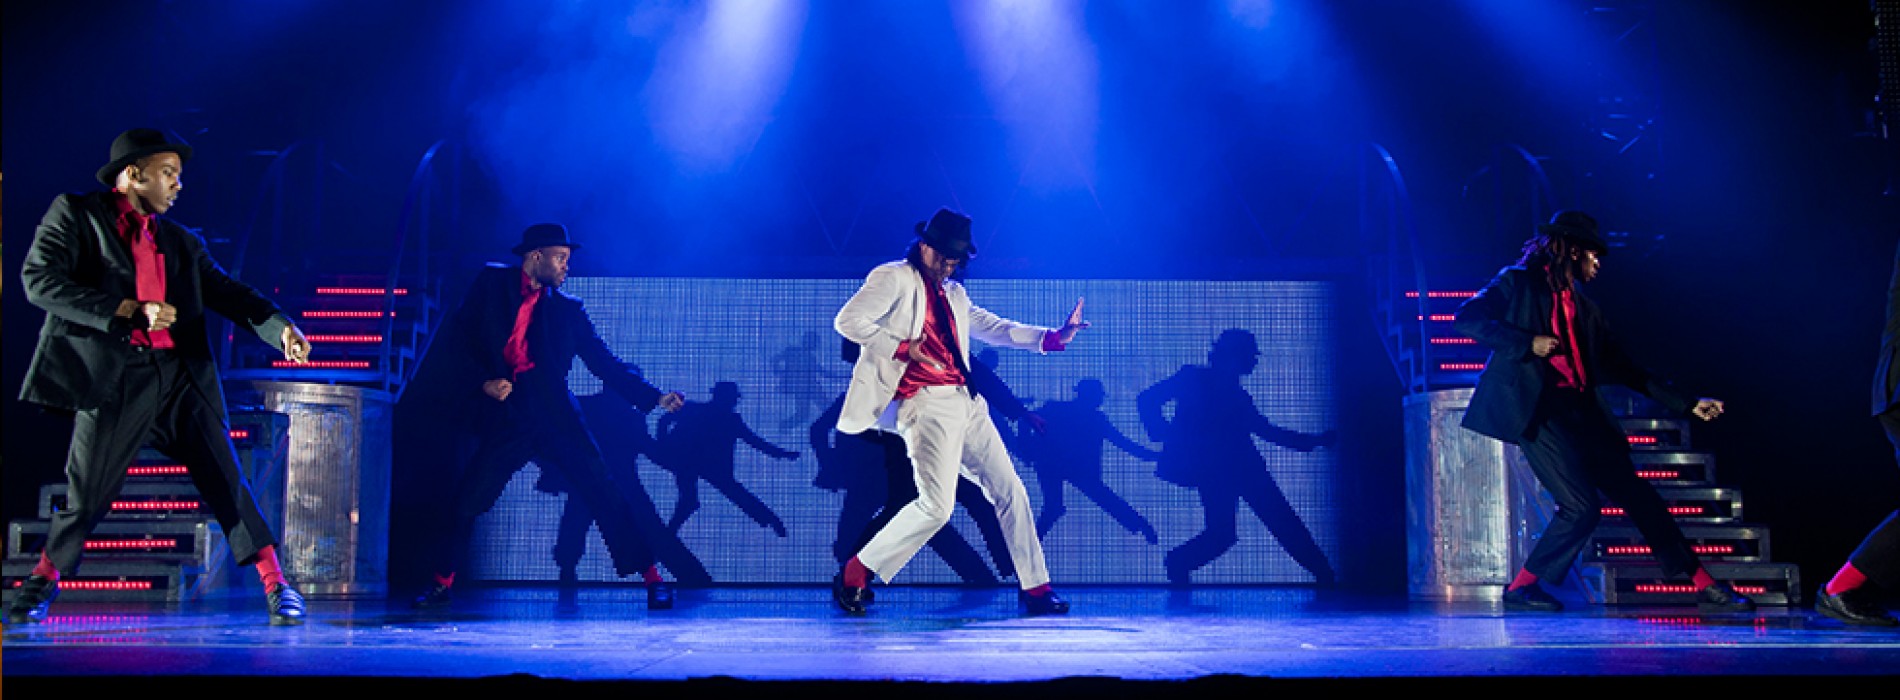 Back by Popular Demand: THRILLER LIVE, a Sensational Celebration of the Music of Michael Jackson, Returns to The Parisian Macao